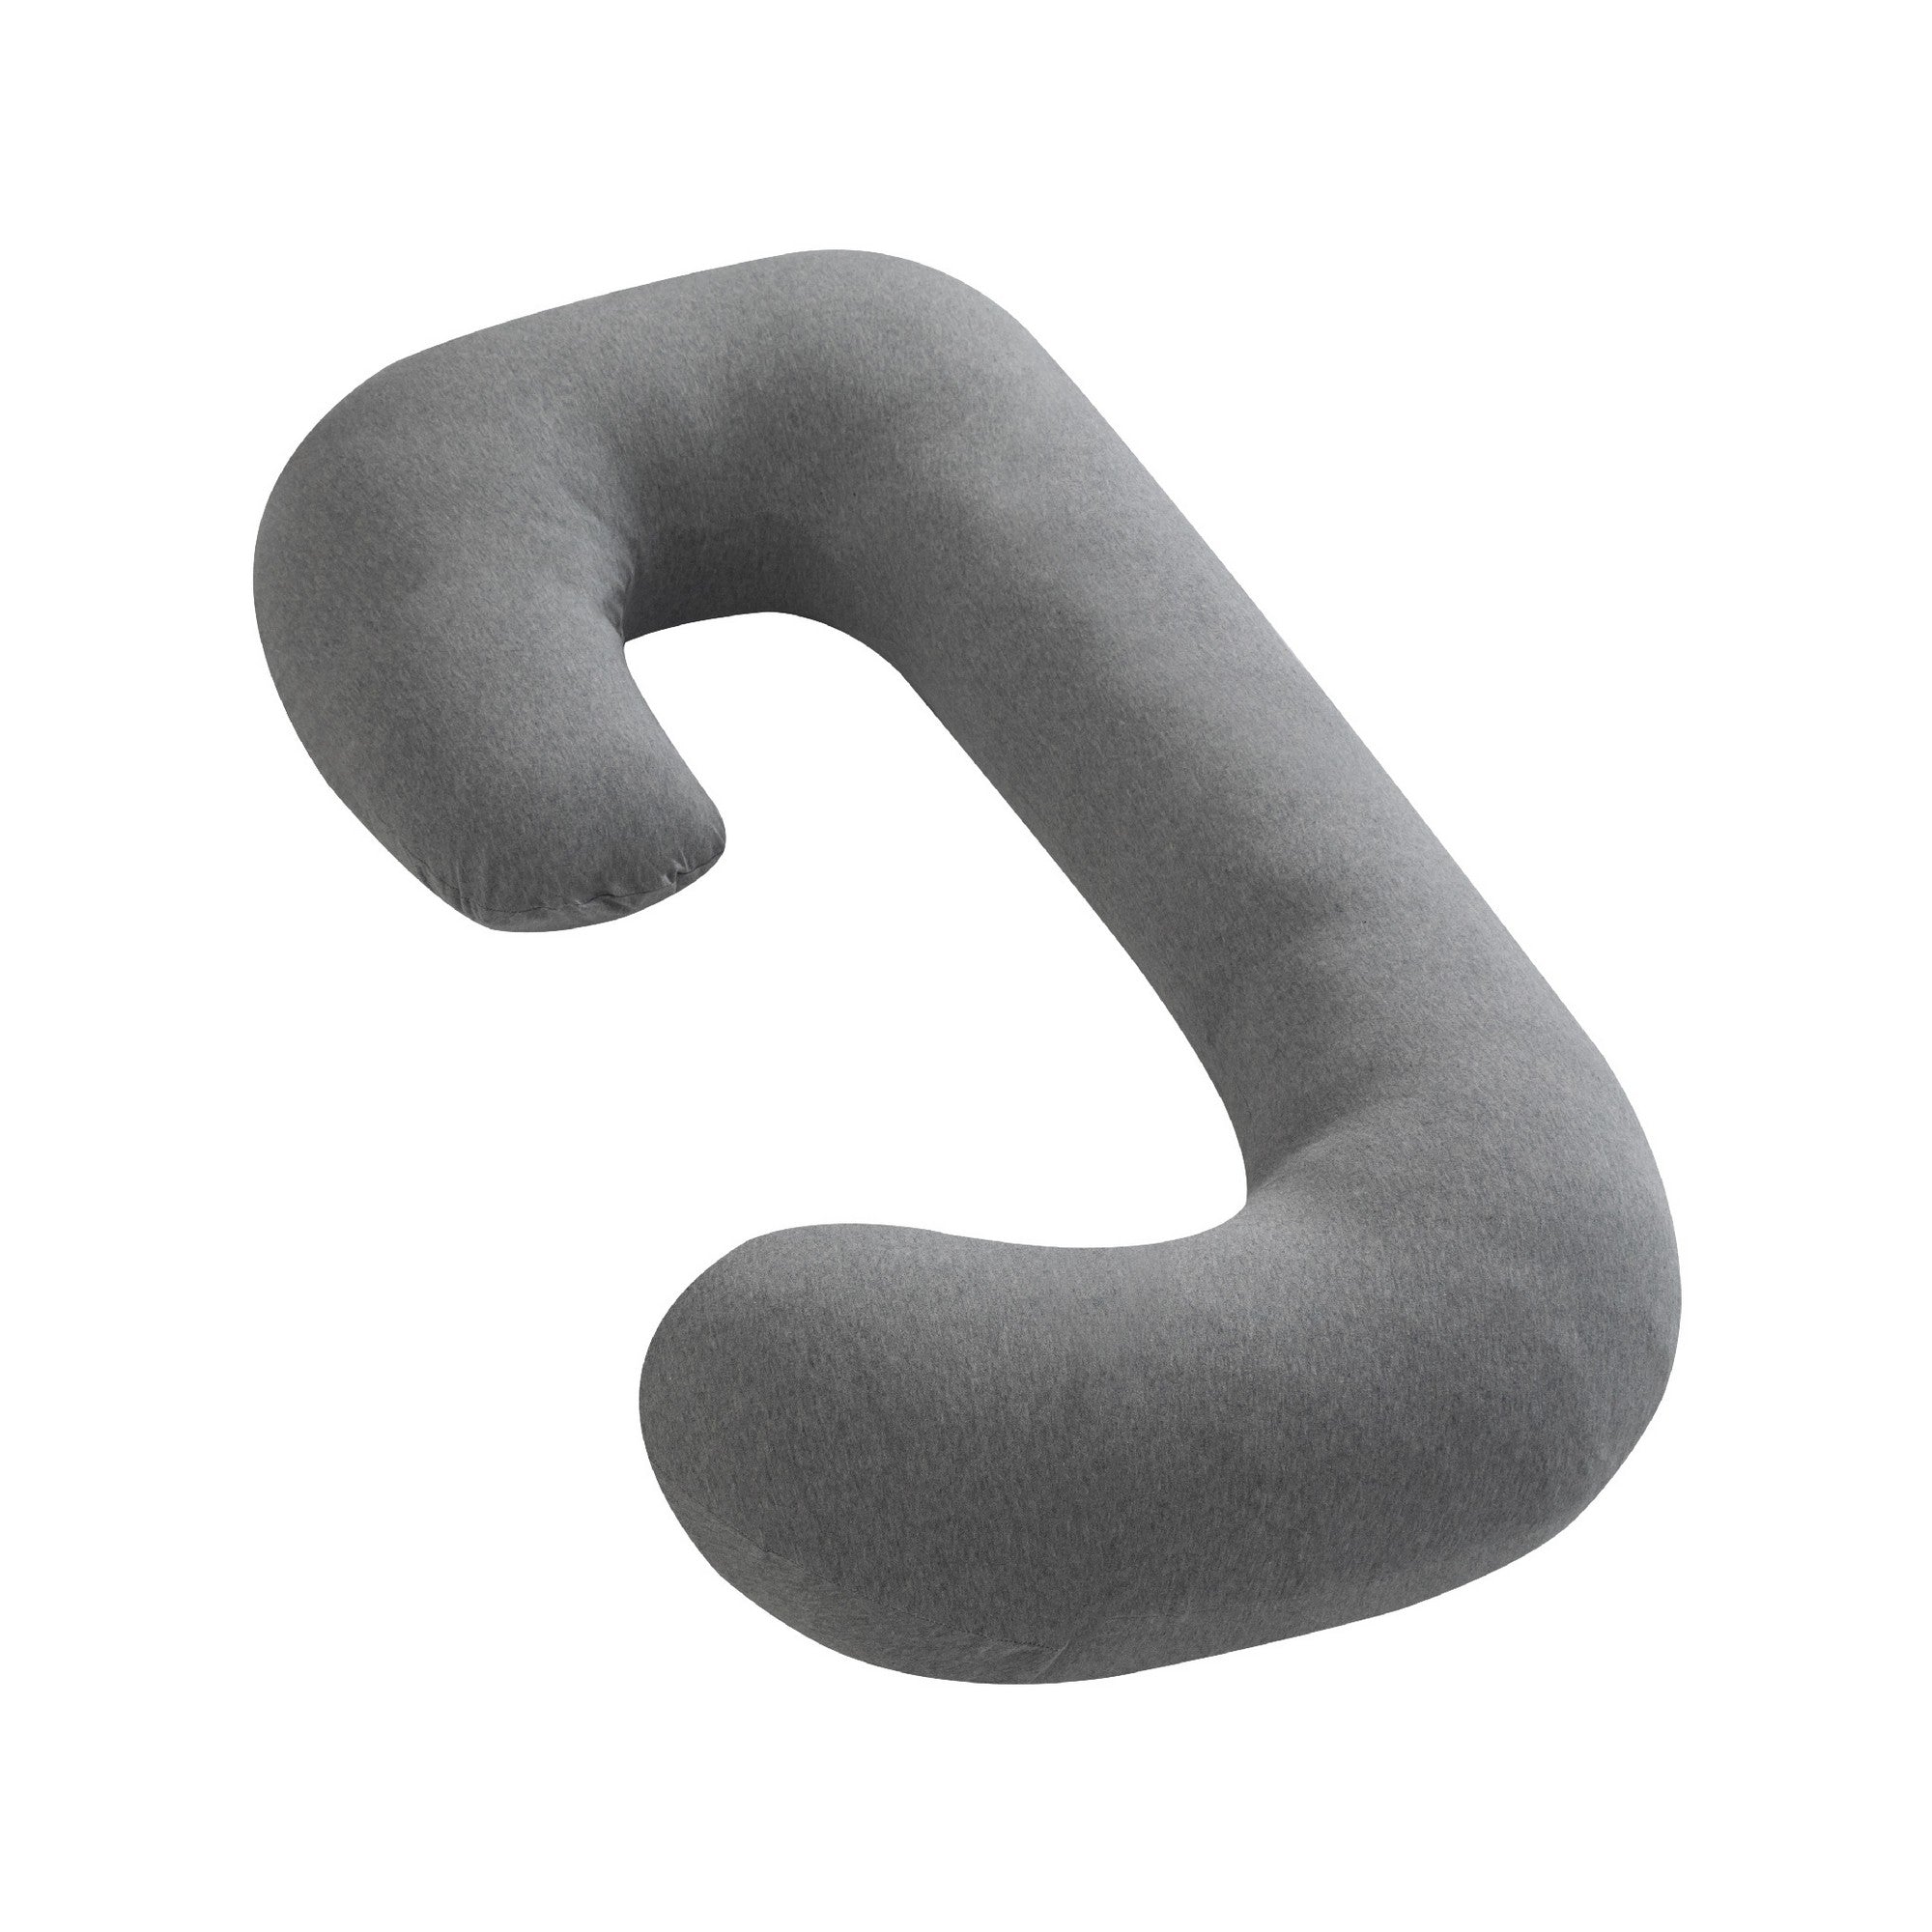 Moon Organic C Shaped Maternity Pillow Maternity Accessories for Adult